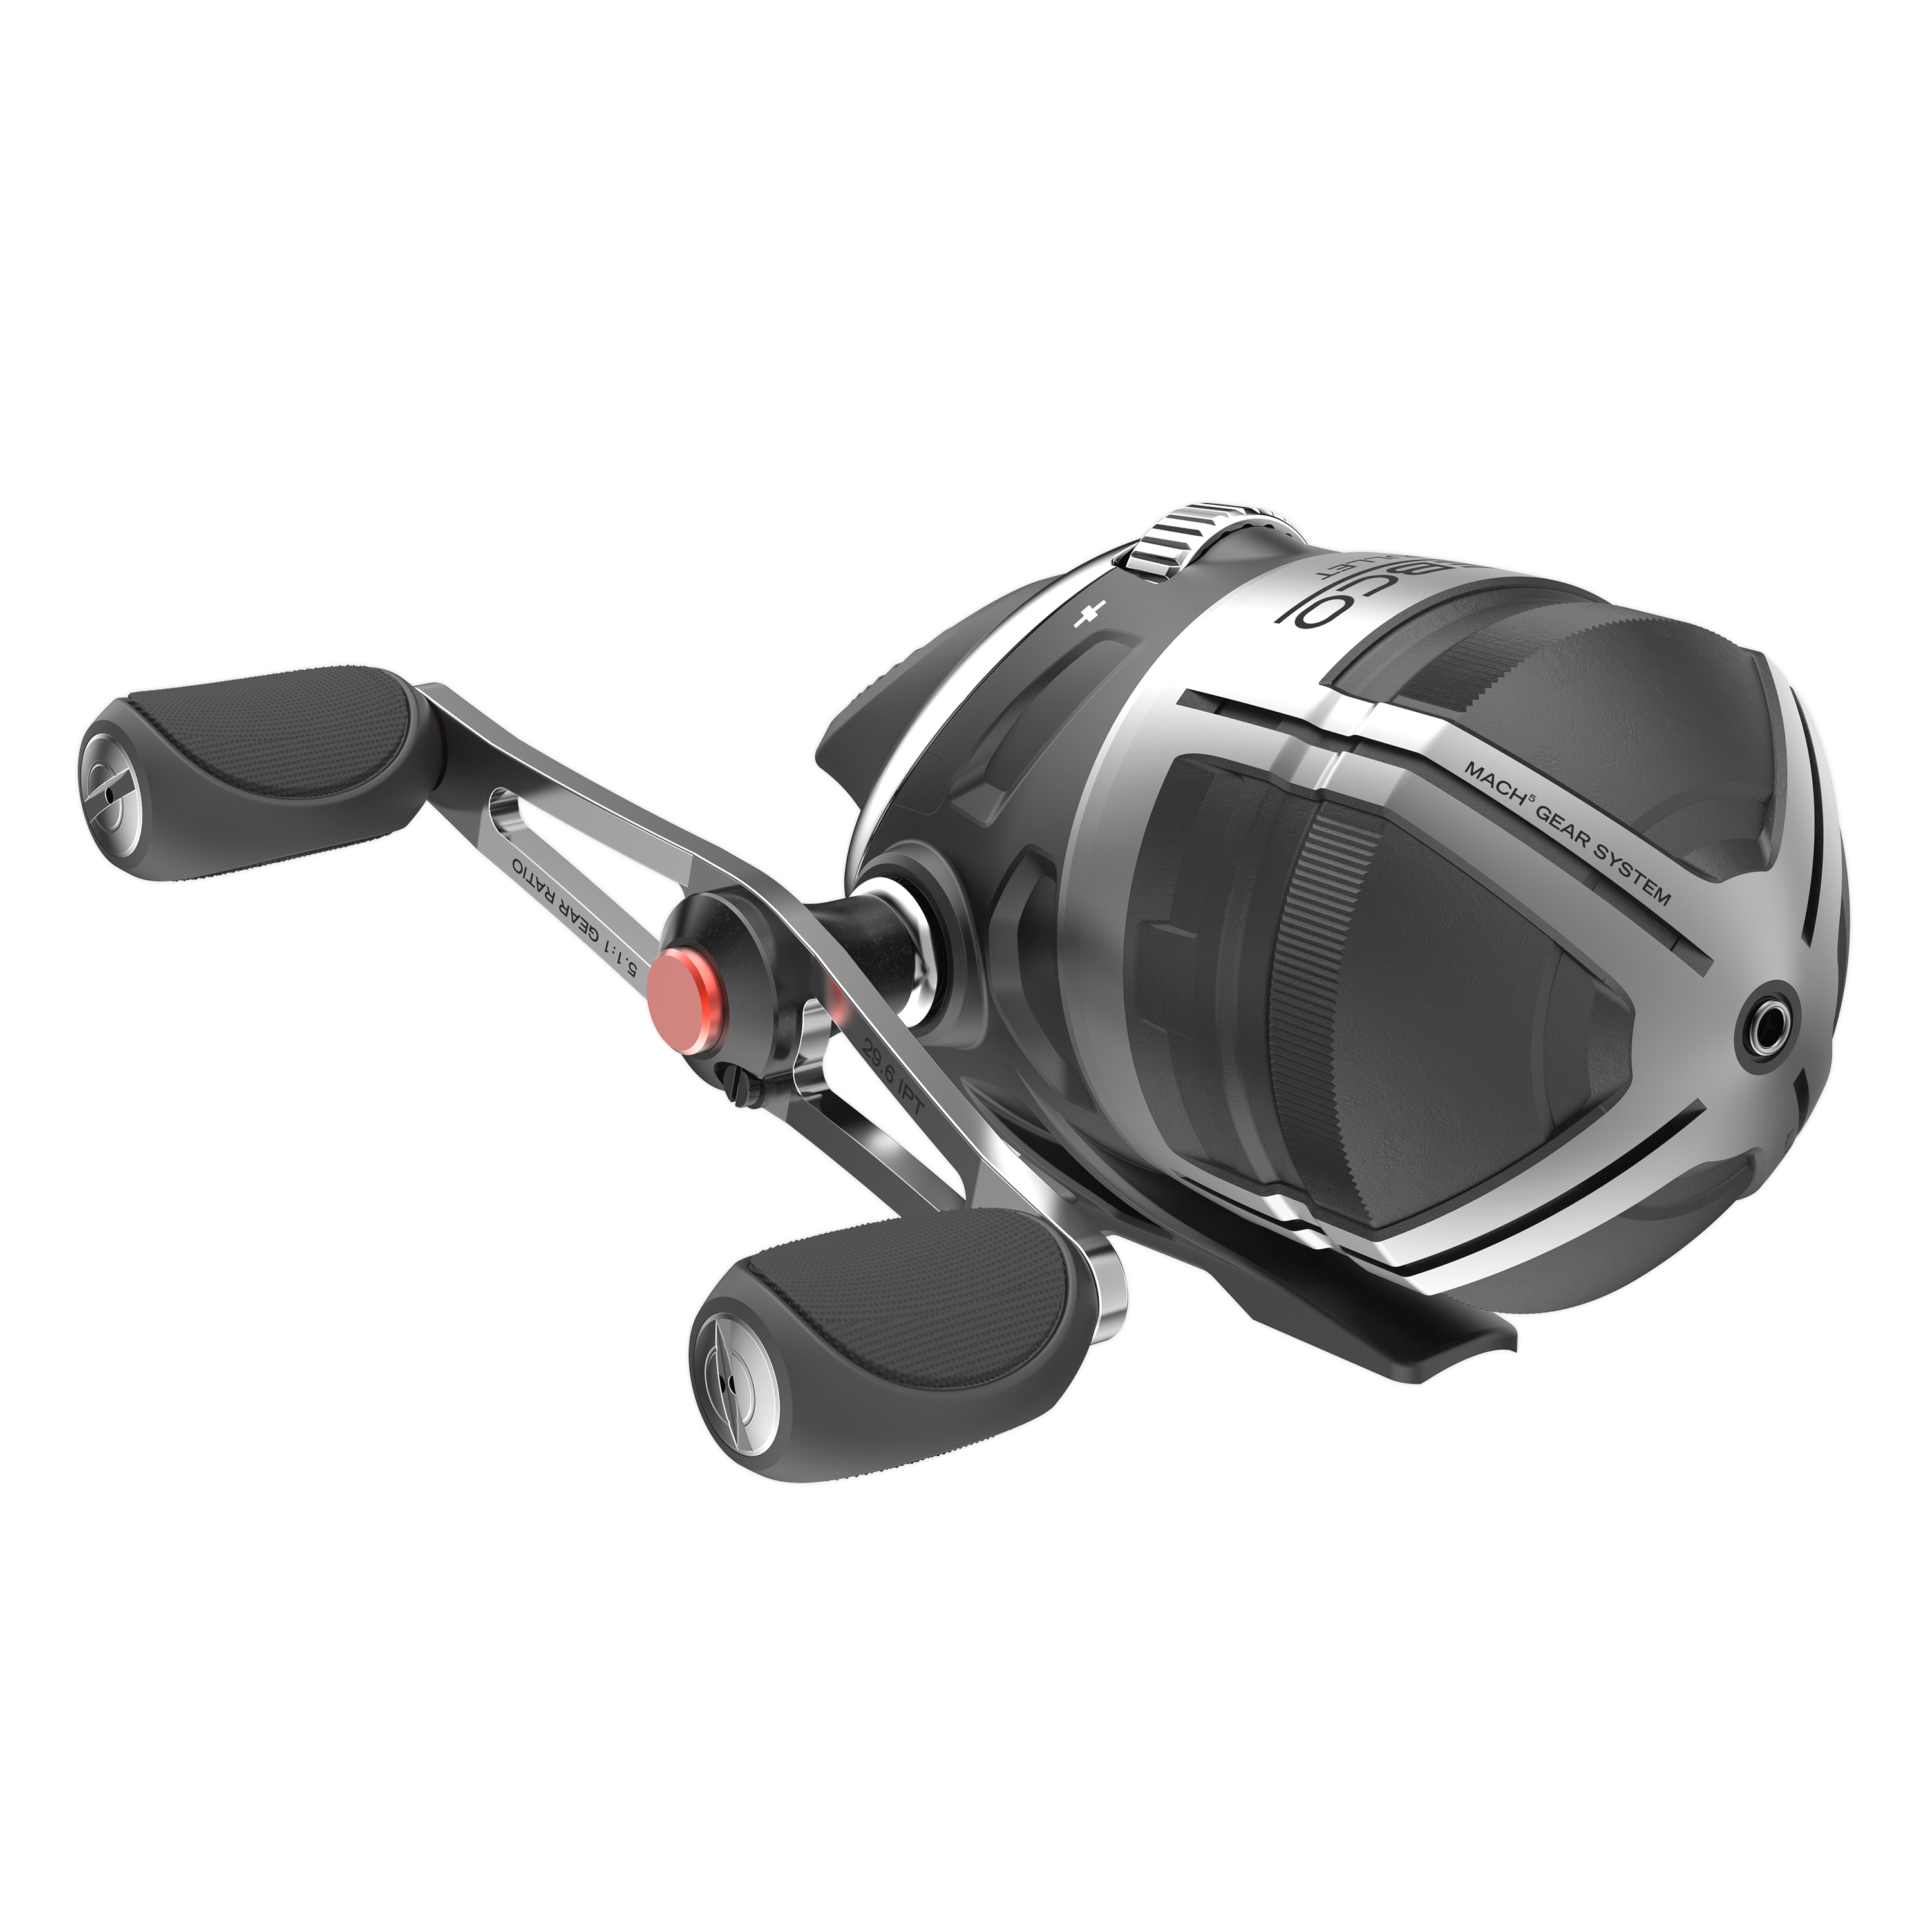 Zebco 33 Spincast Fishing Reel, Quickset Anti-Reverse with Bite Alert, Smooth Dial-Adjustable Drag, Powerful All-Metal Gears with a Lightweight